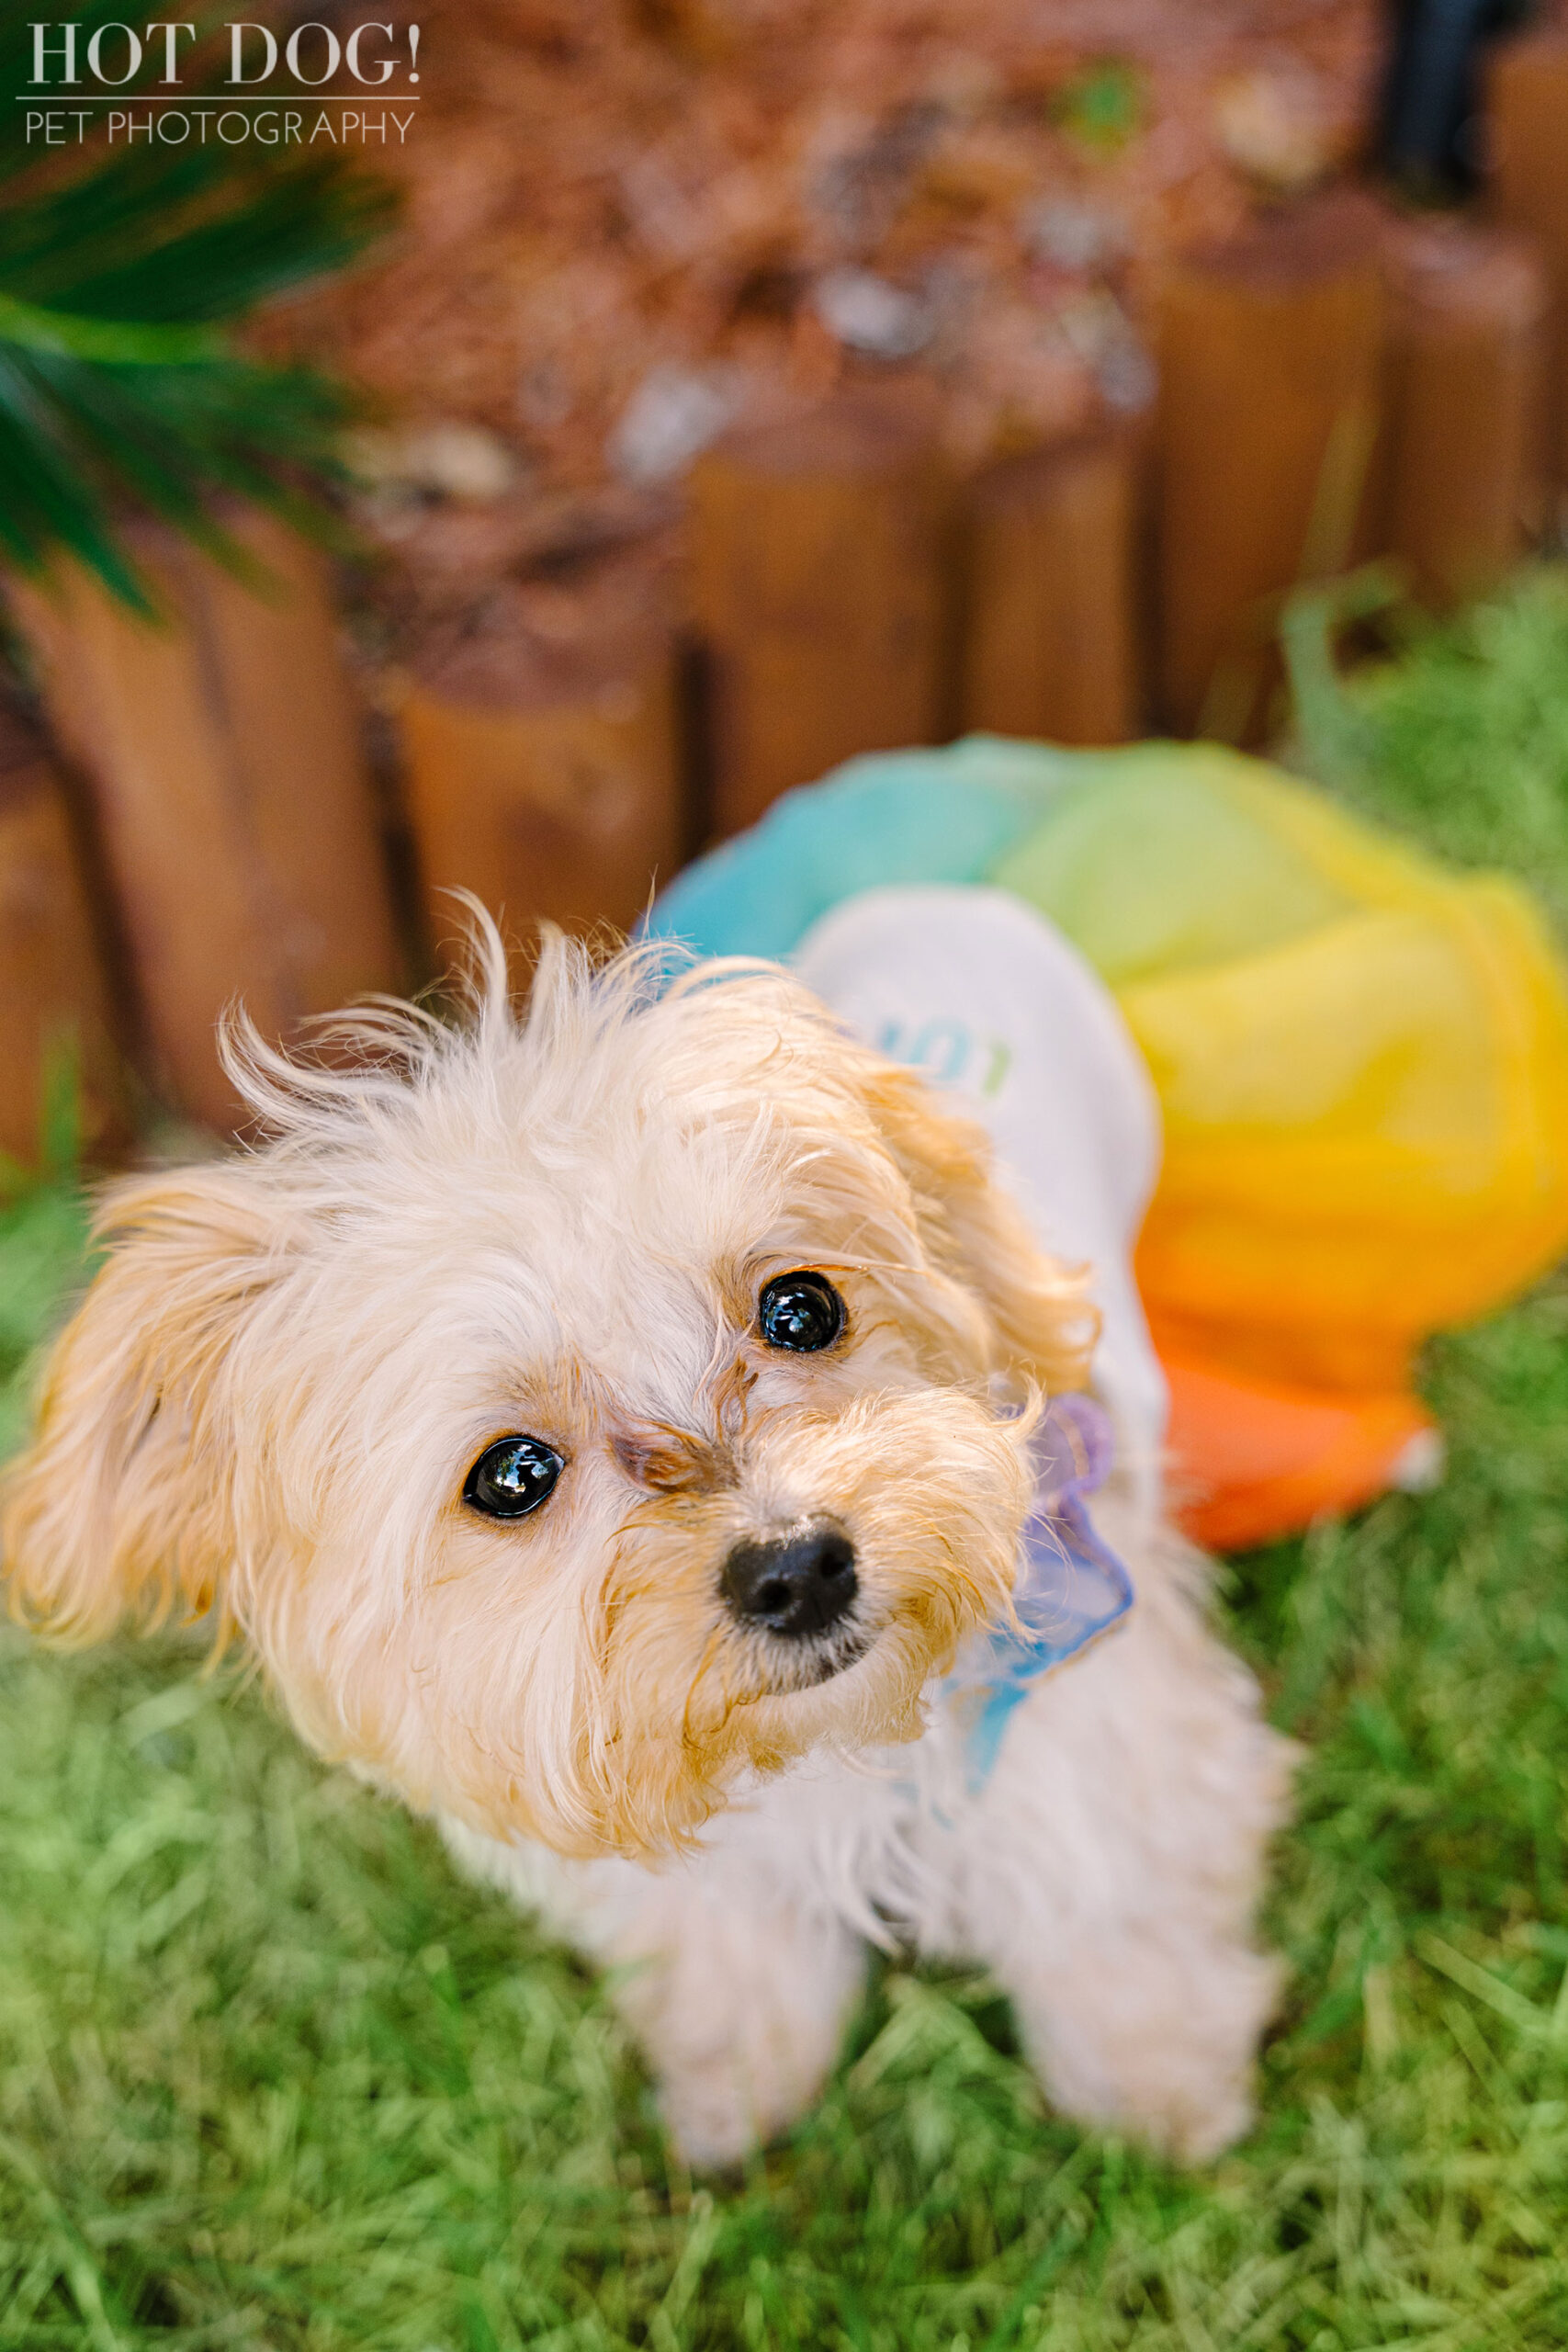 Stunning pet portraits of Malchipoo puppies in Orlando by Hot Dog! Pet Photography.